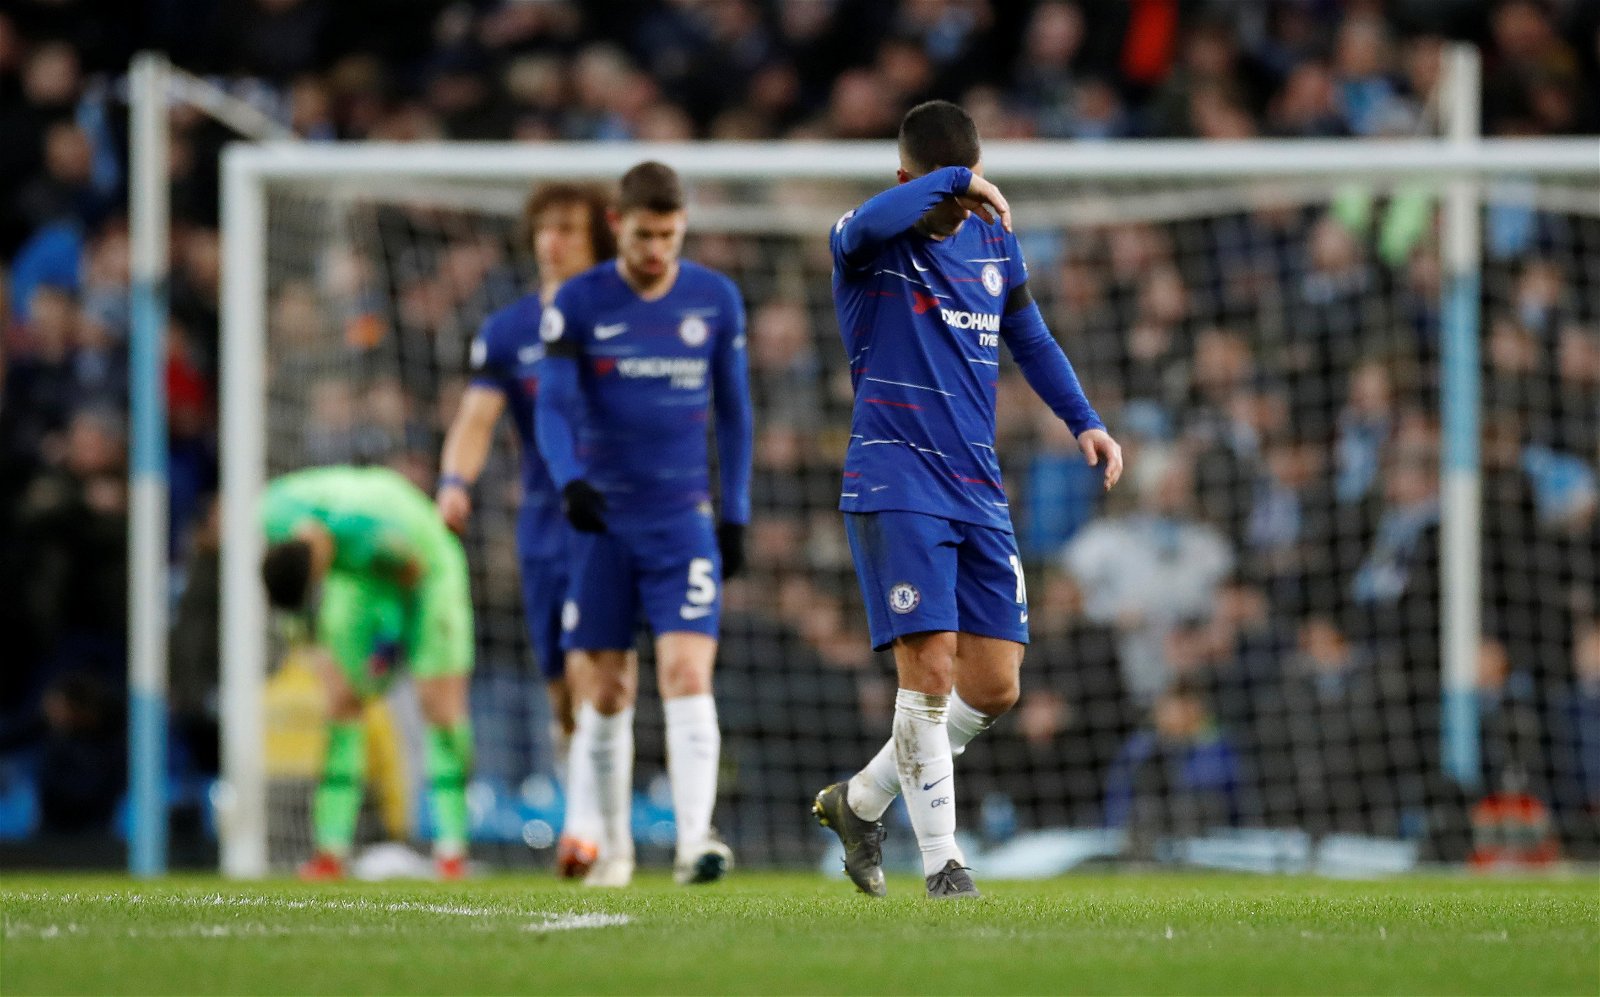 Alan Shearer Recognized Massive Flaw In Sarri's Coaching After 6-0 Defeat